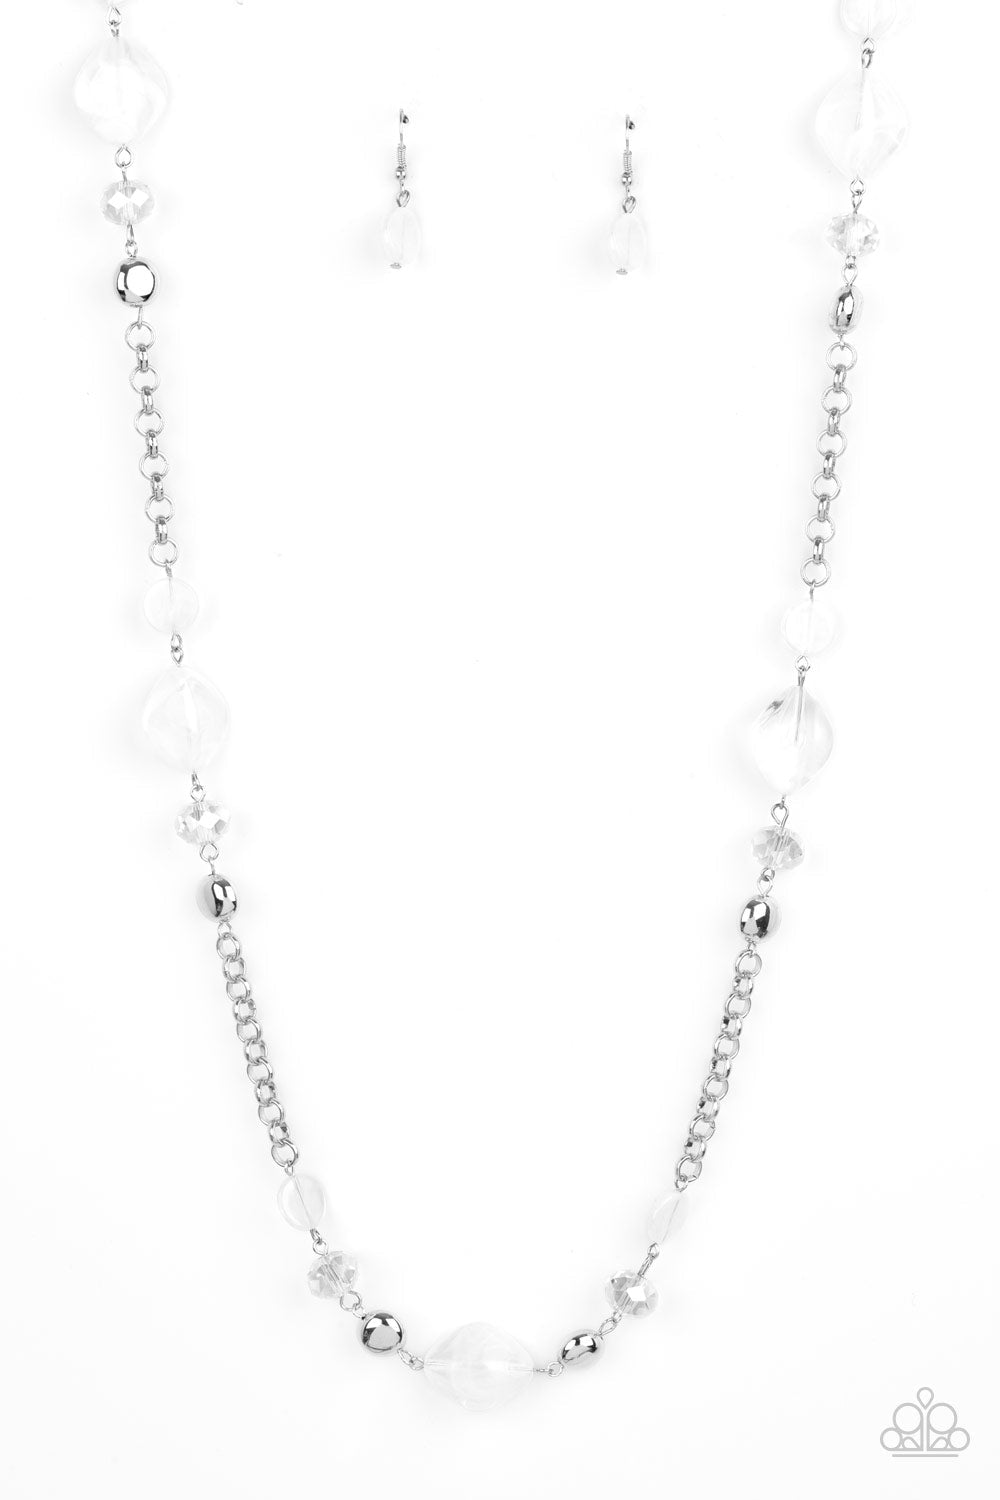 Light-Scattering Luminosity White Necklace - Paparazzi Accessories- lightbox - CarasShop.com - $5 Jewelry by Cara Jewels